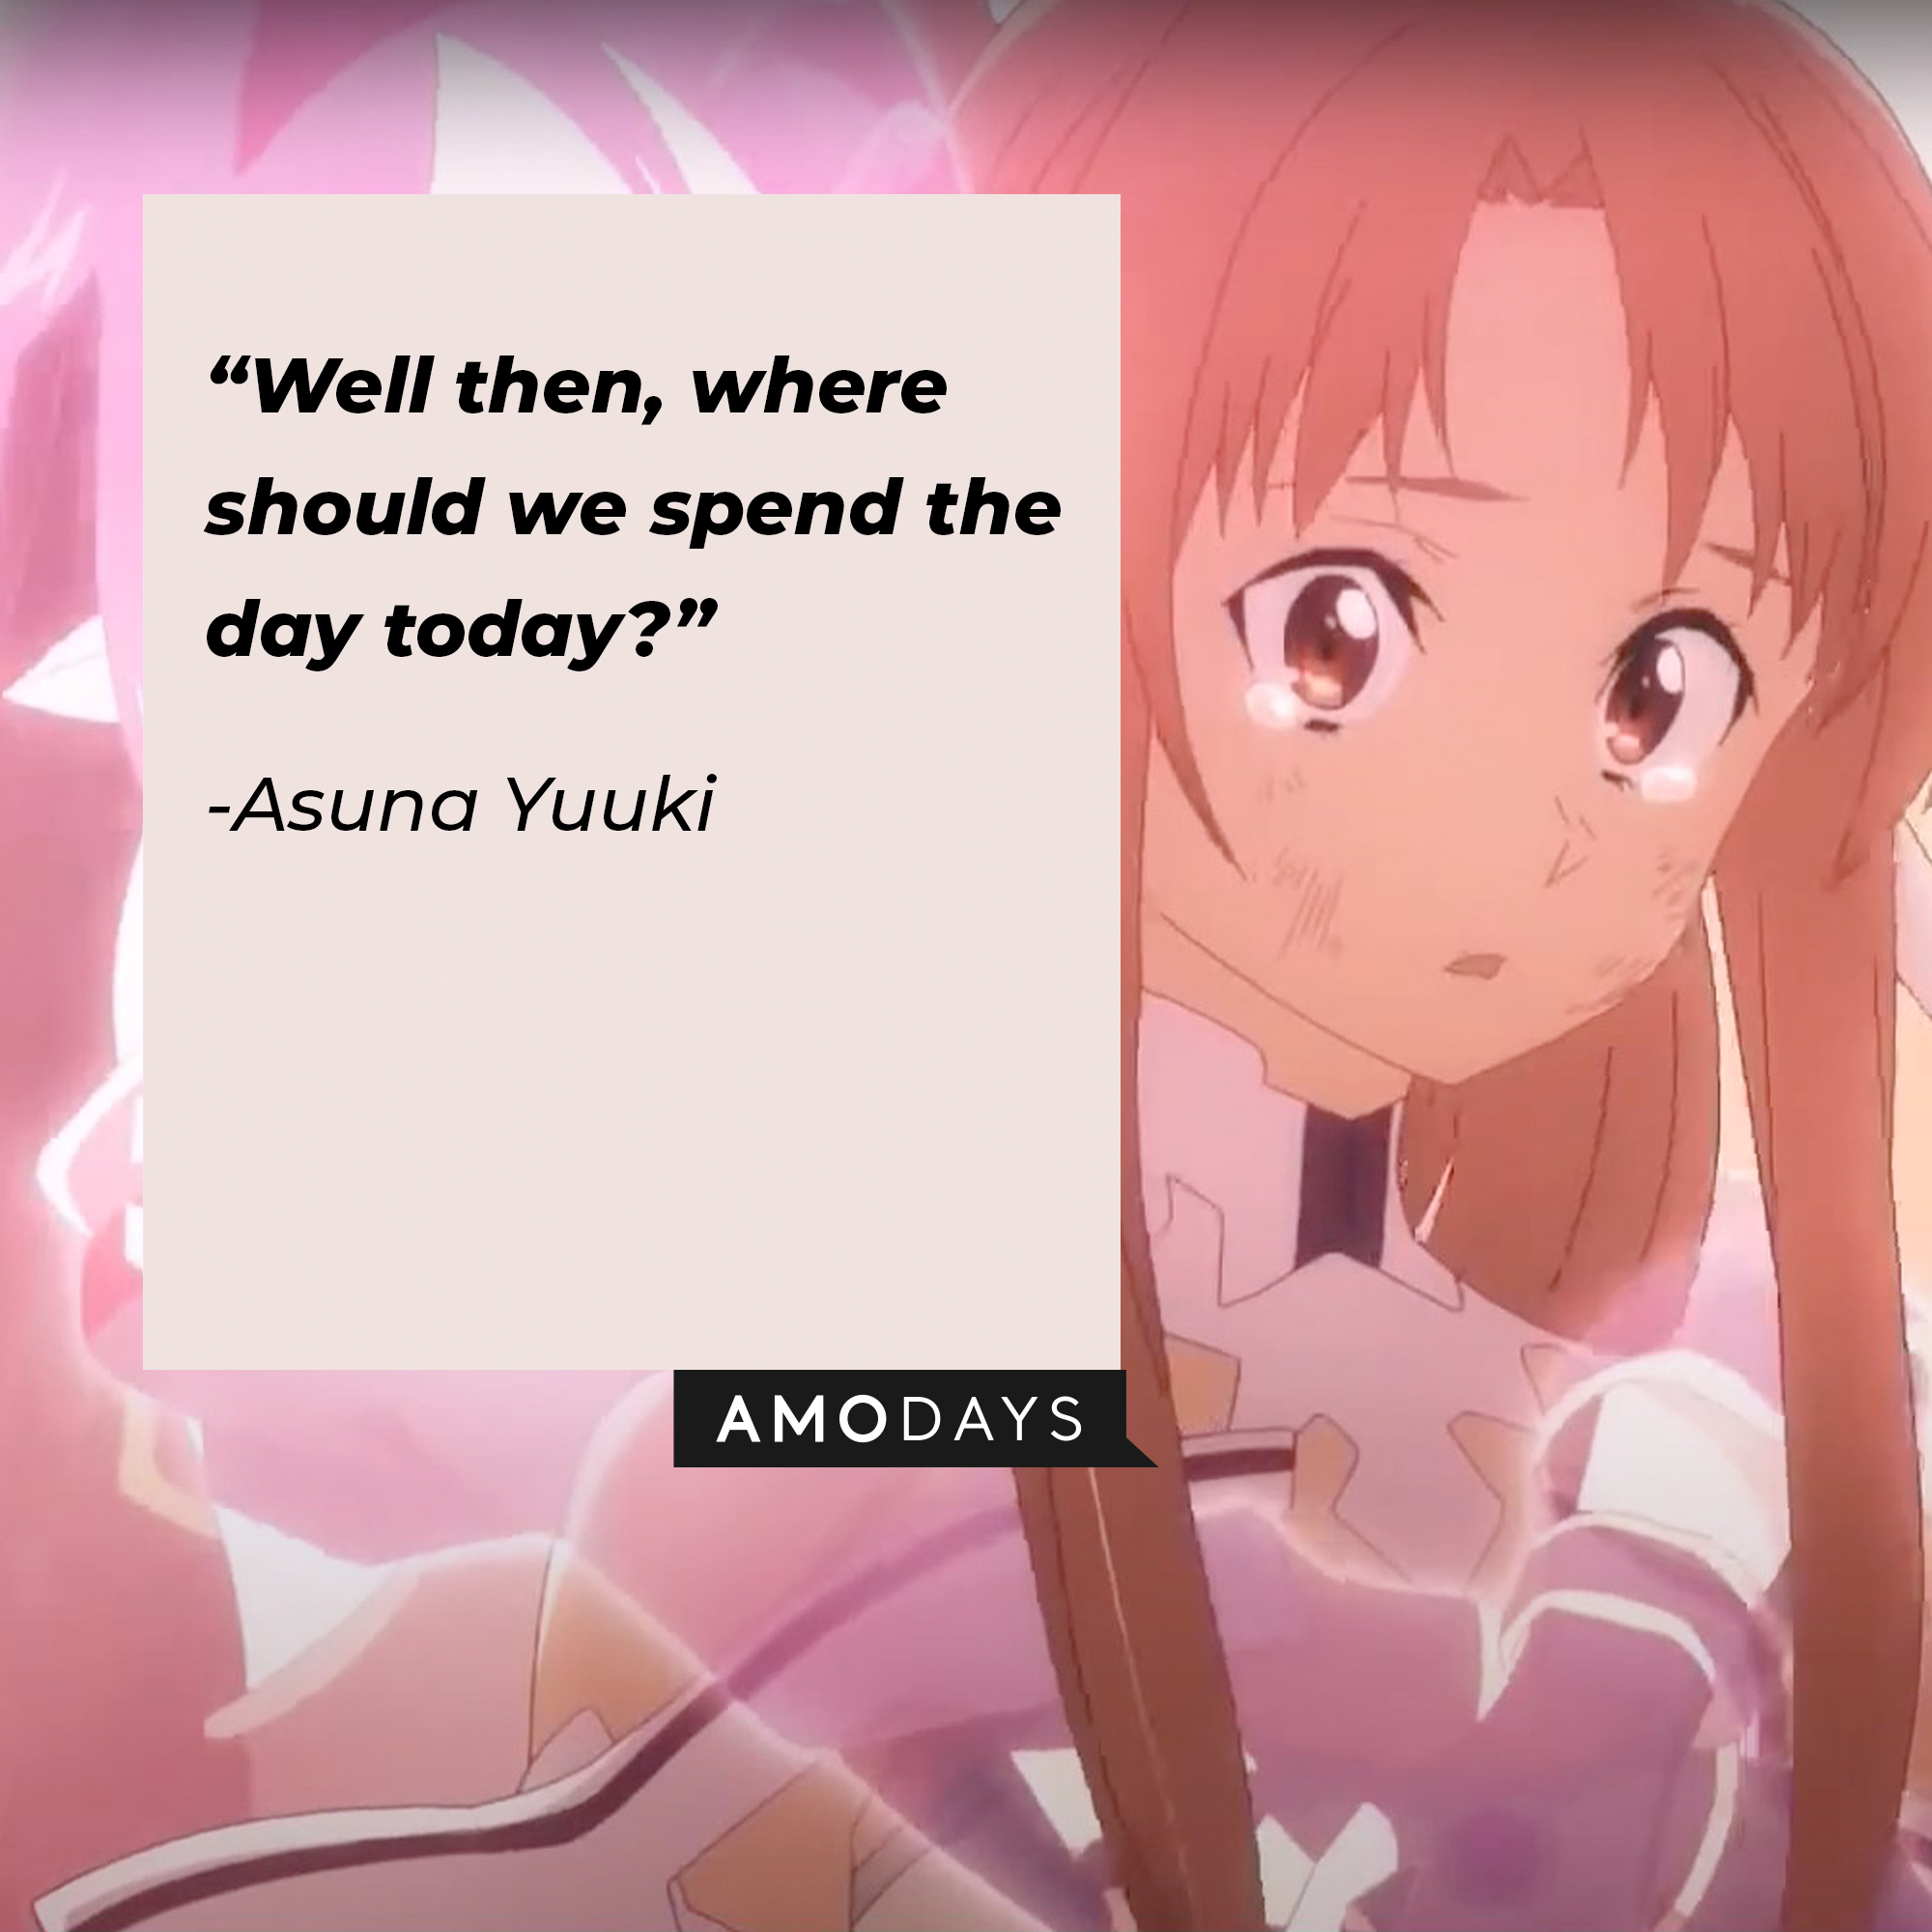 A picture of Asuna Yuuki with her quote: “Well then, where should we spend the day today?” | Source: facebook.com/SwordArtOnlineUSA